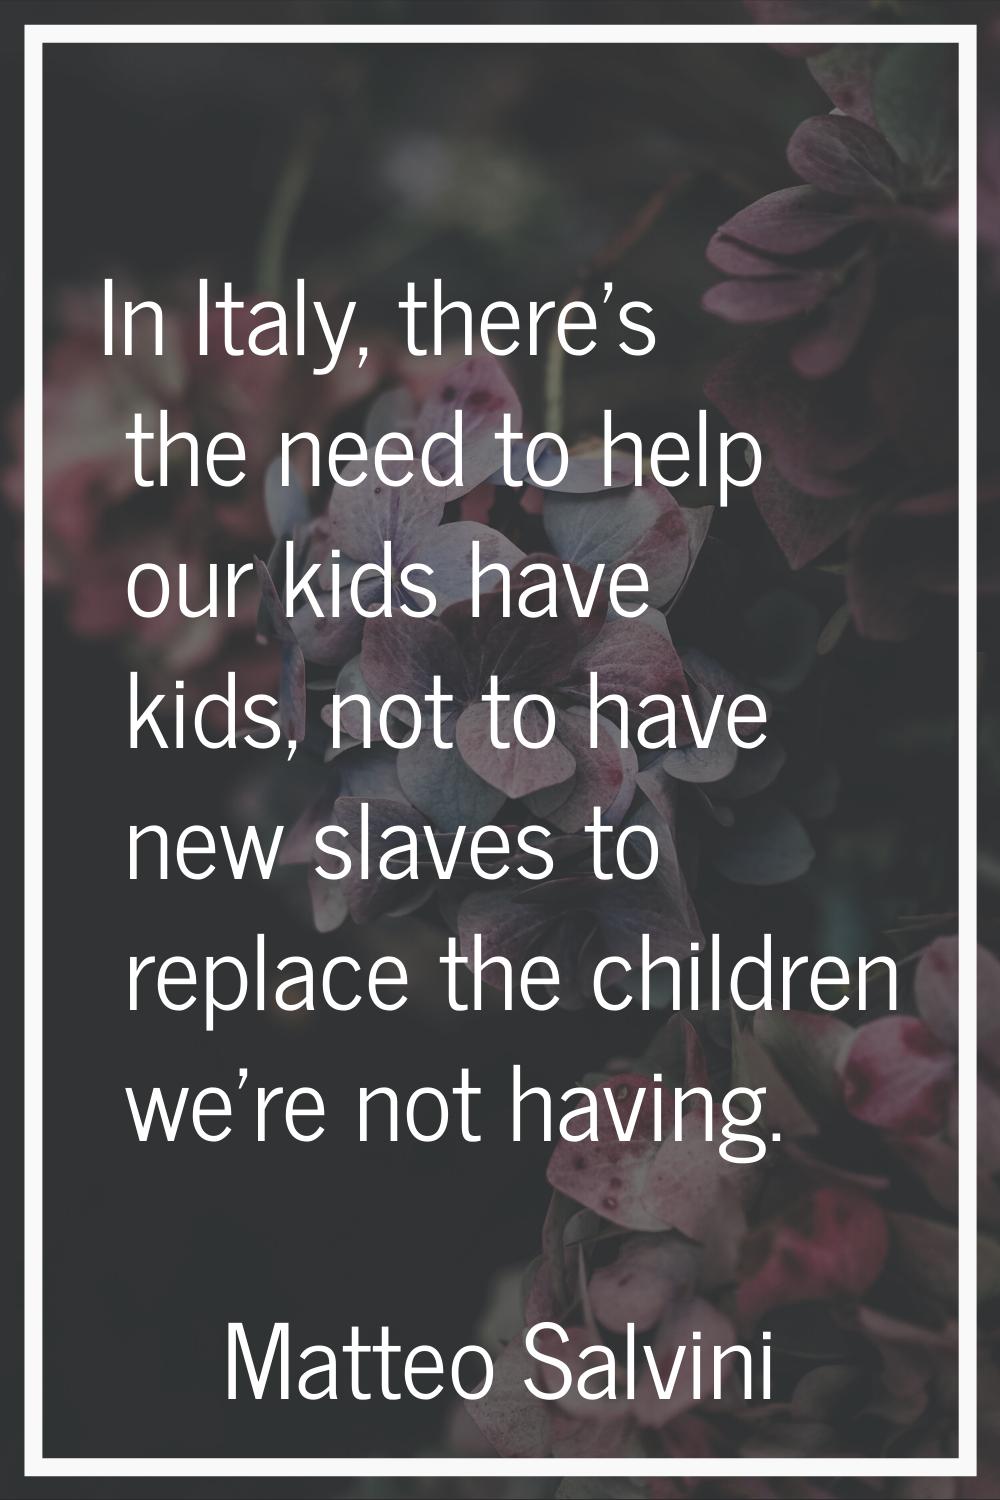 In Italy, there's the need to help our kids have kids, not to have new slaves to replace the childr